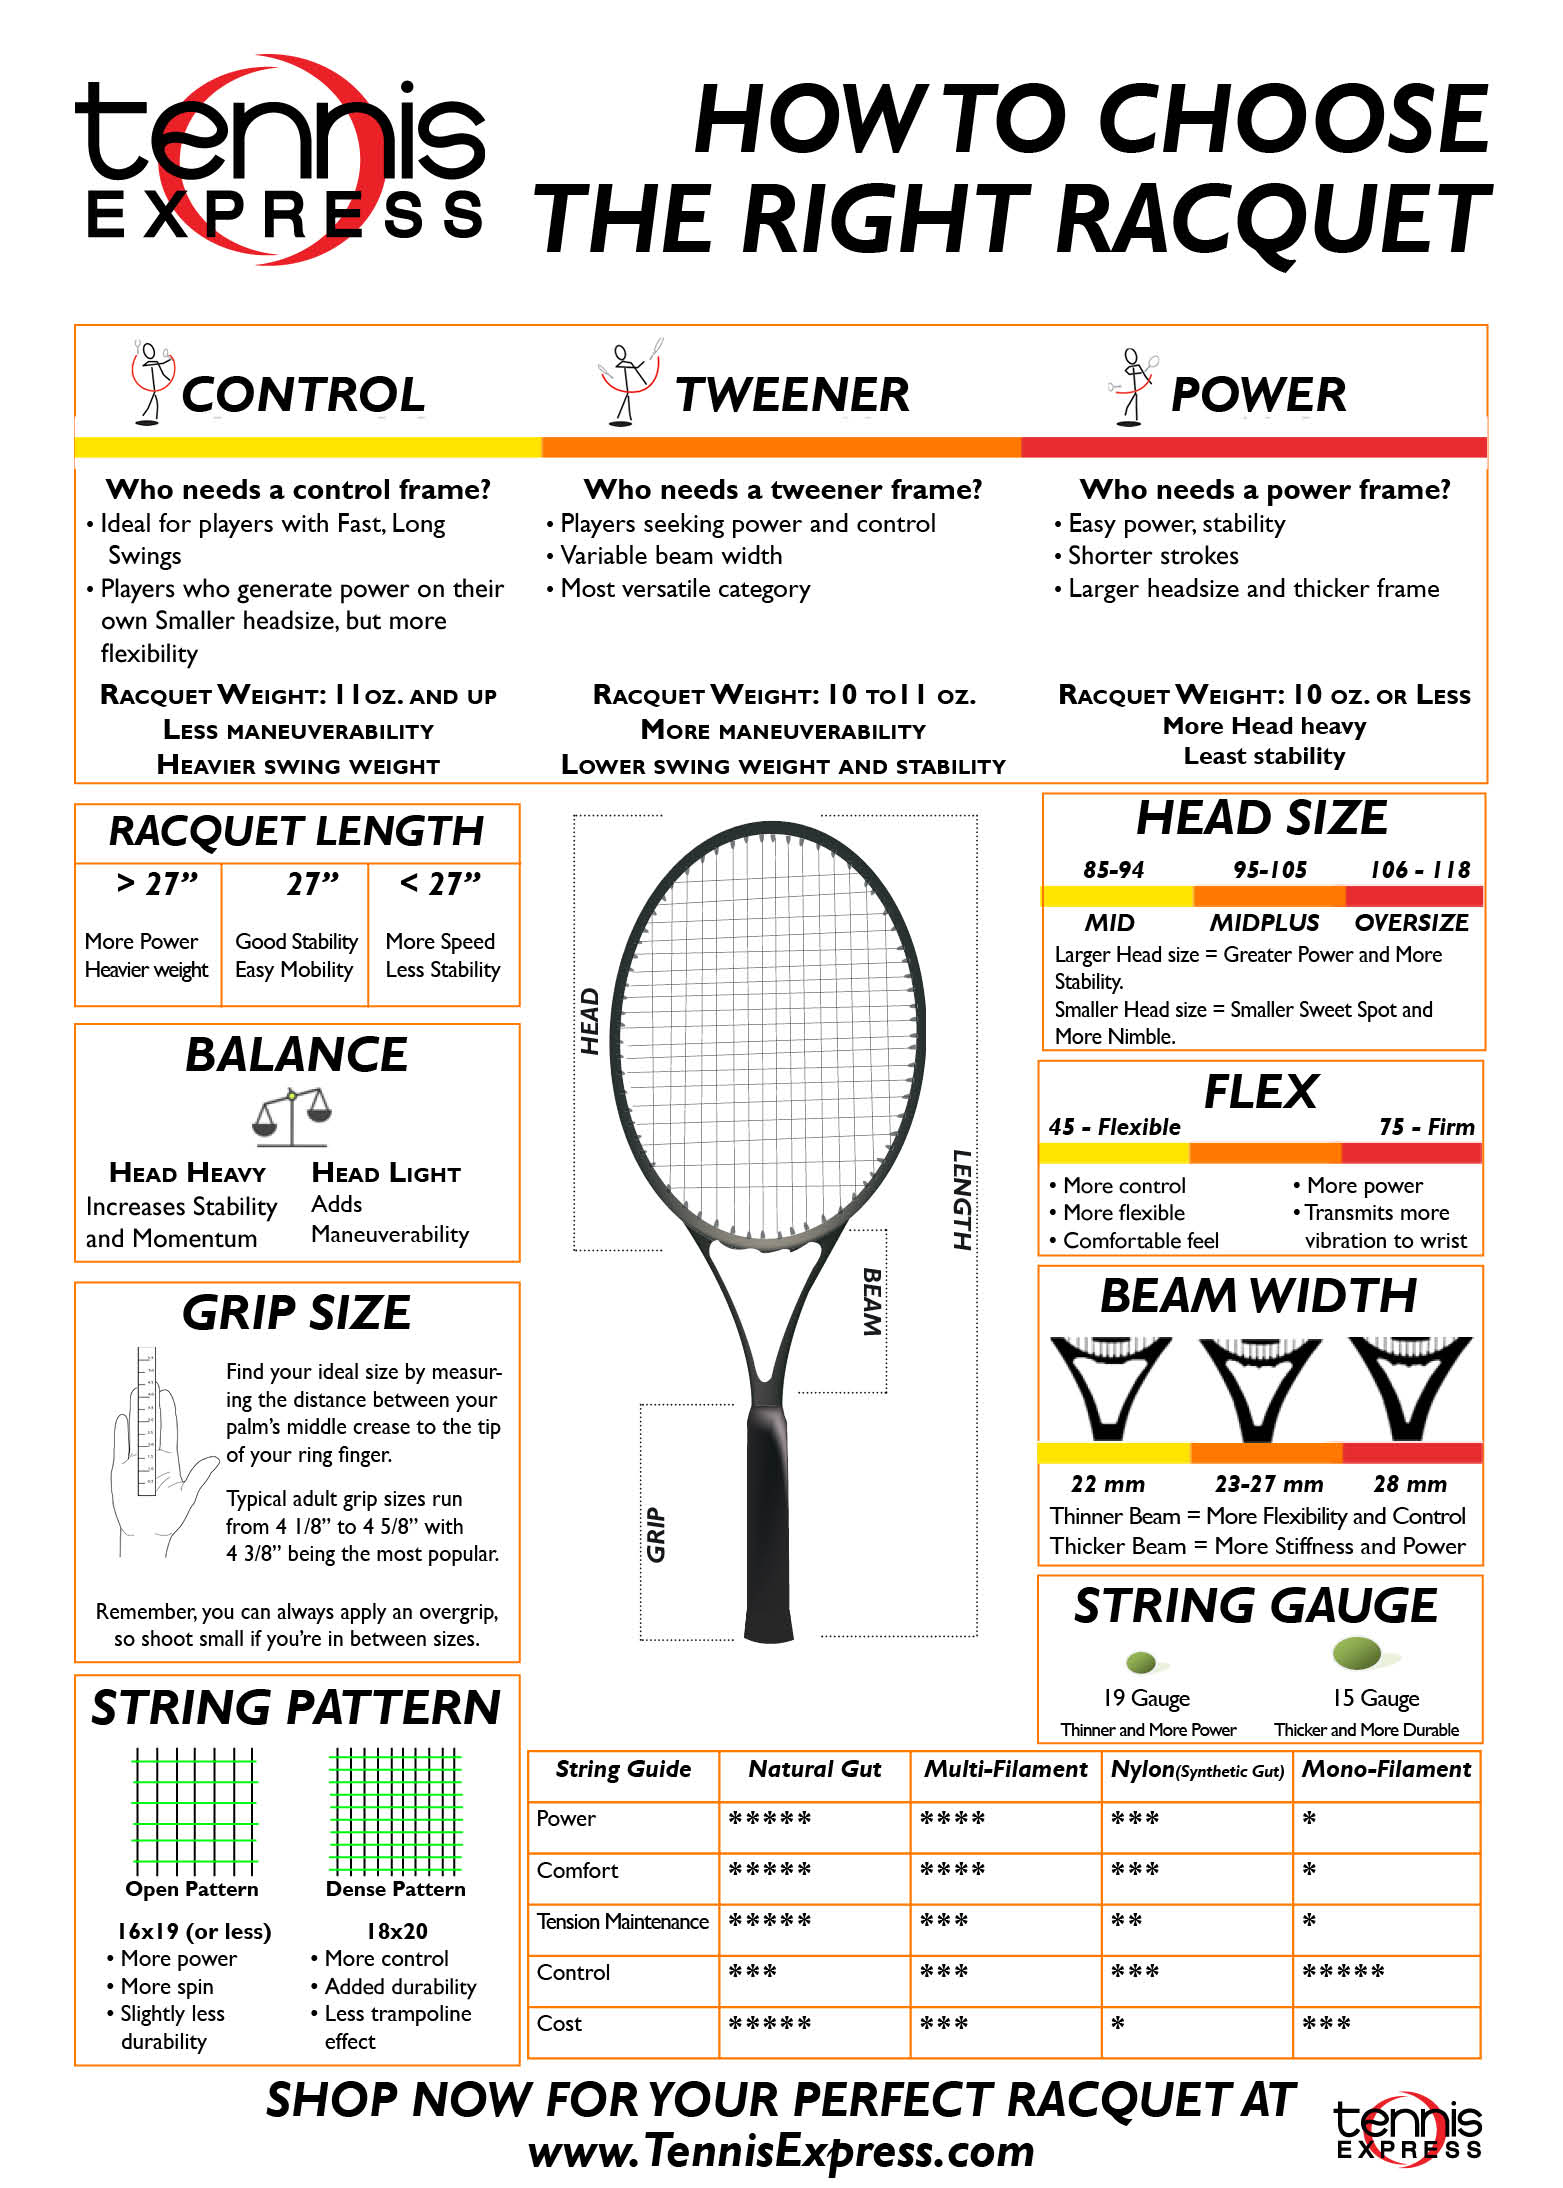 The Different Types of Tennis Grips and How to Choose the Right